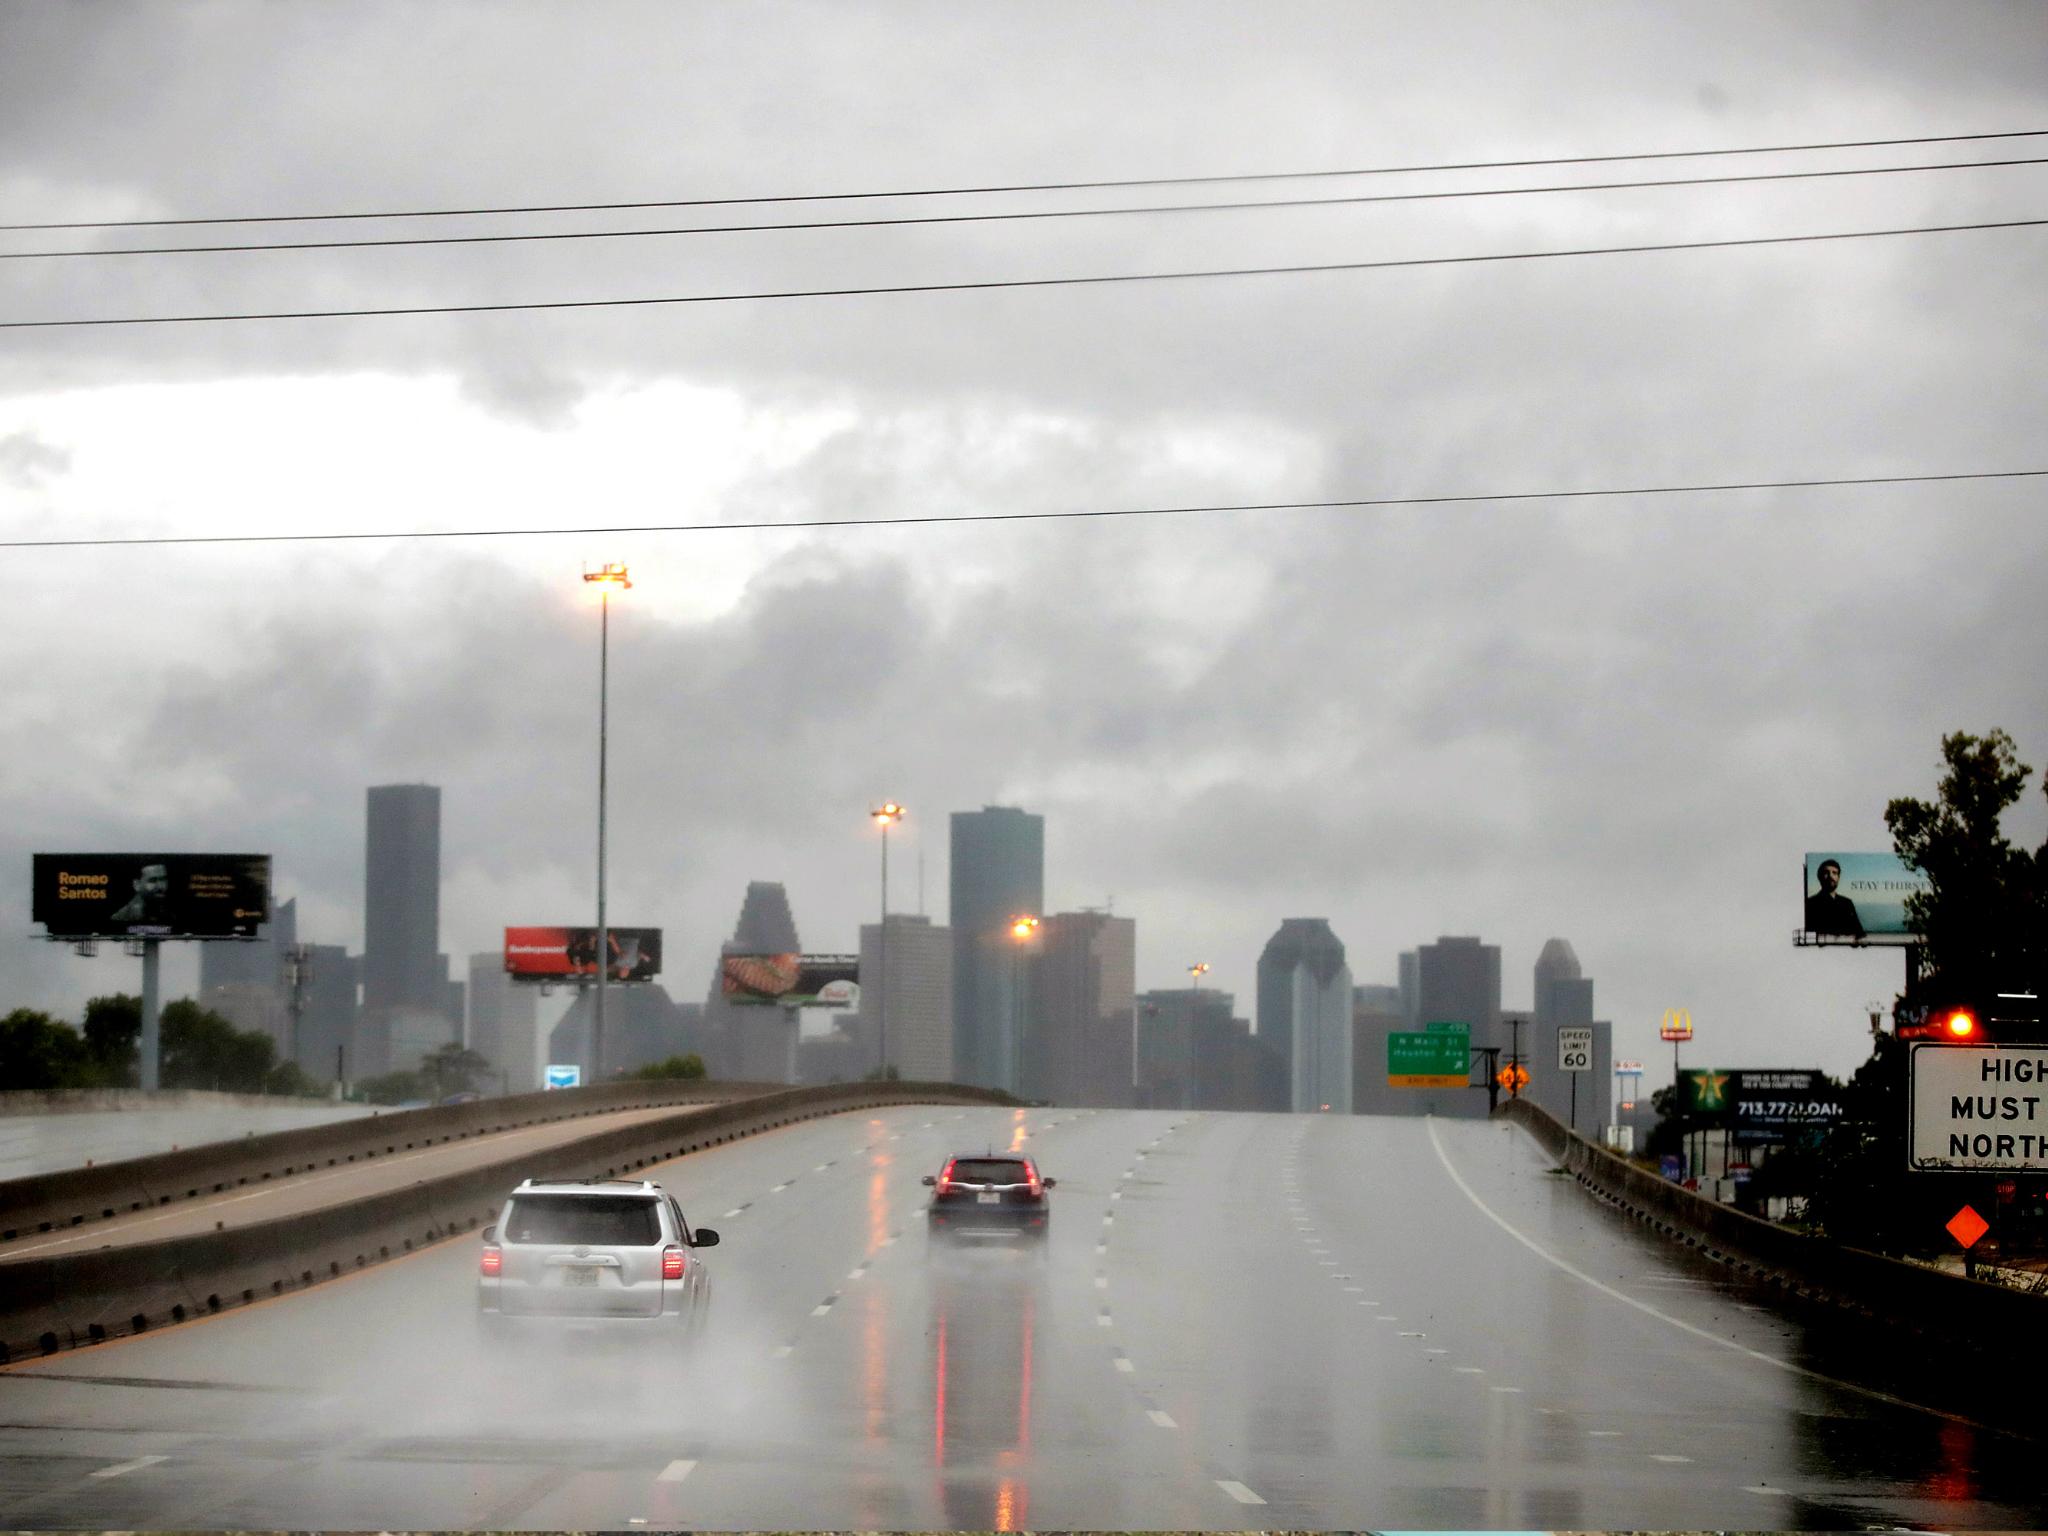 Rain from Hurricane Harvey batters the downtown area on 26 August 2017 in Houston, Texas.